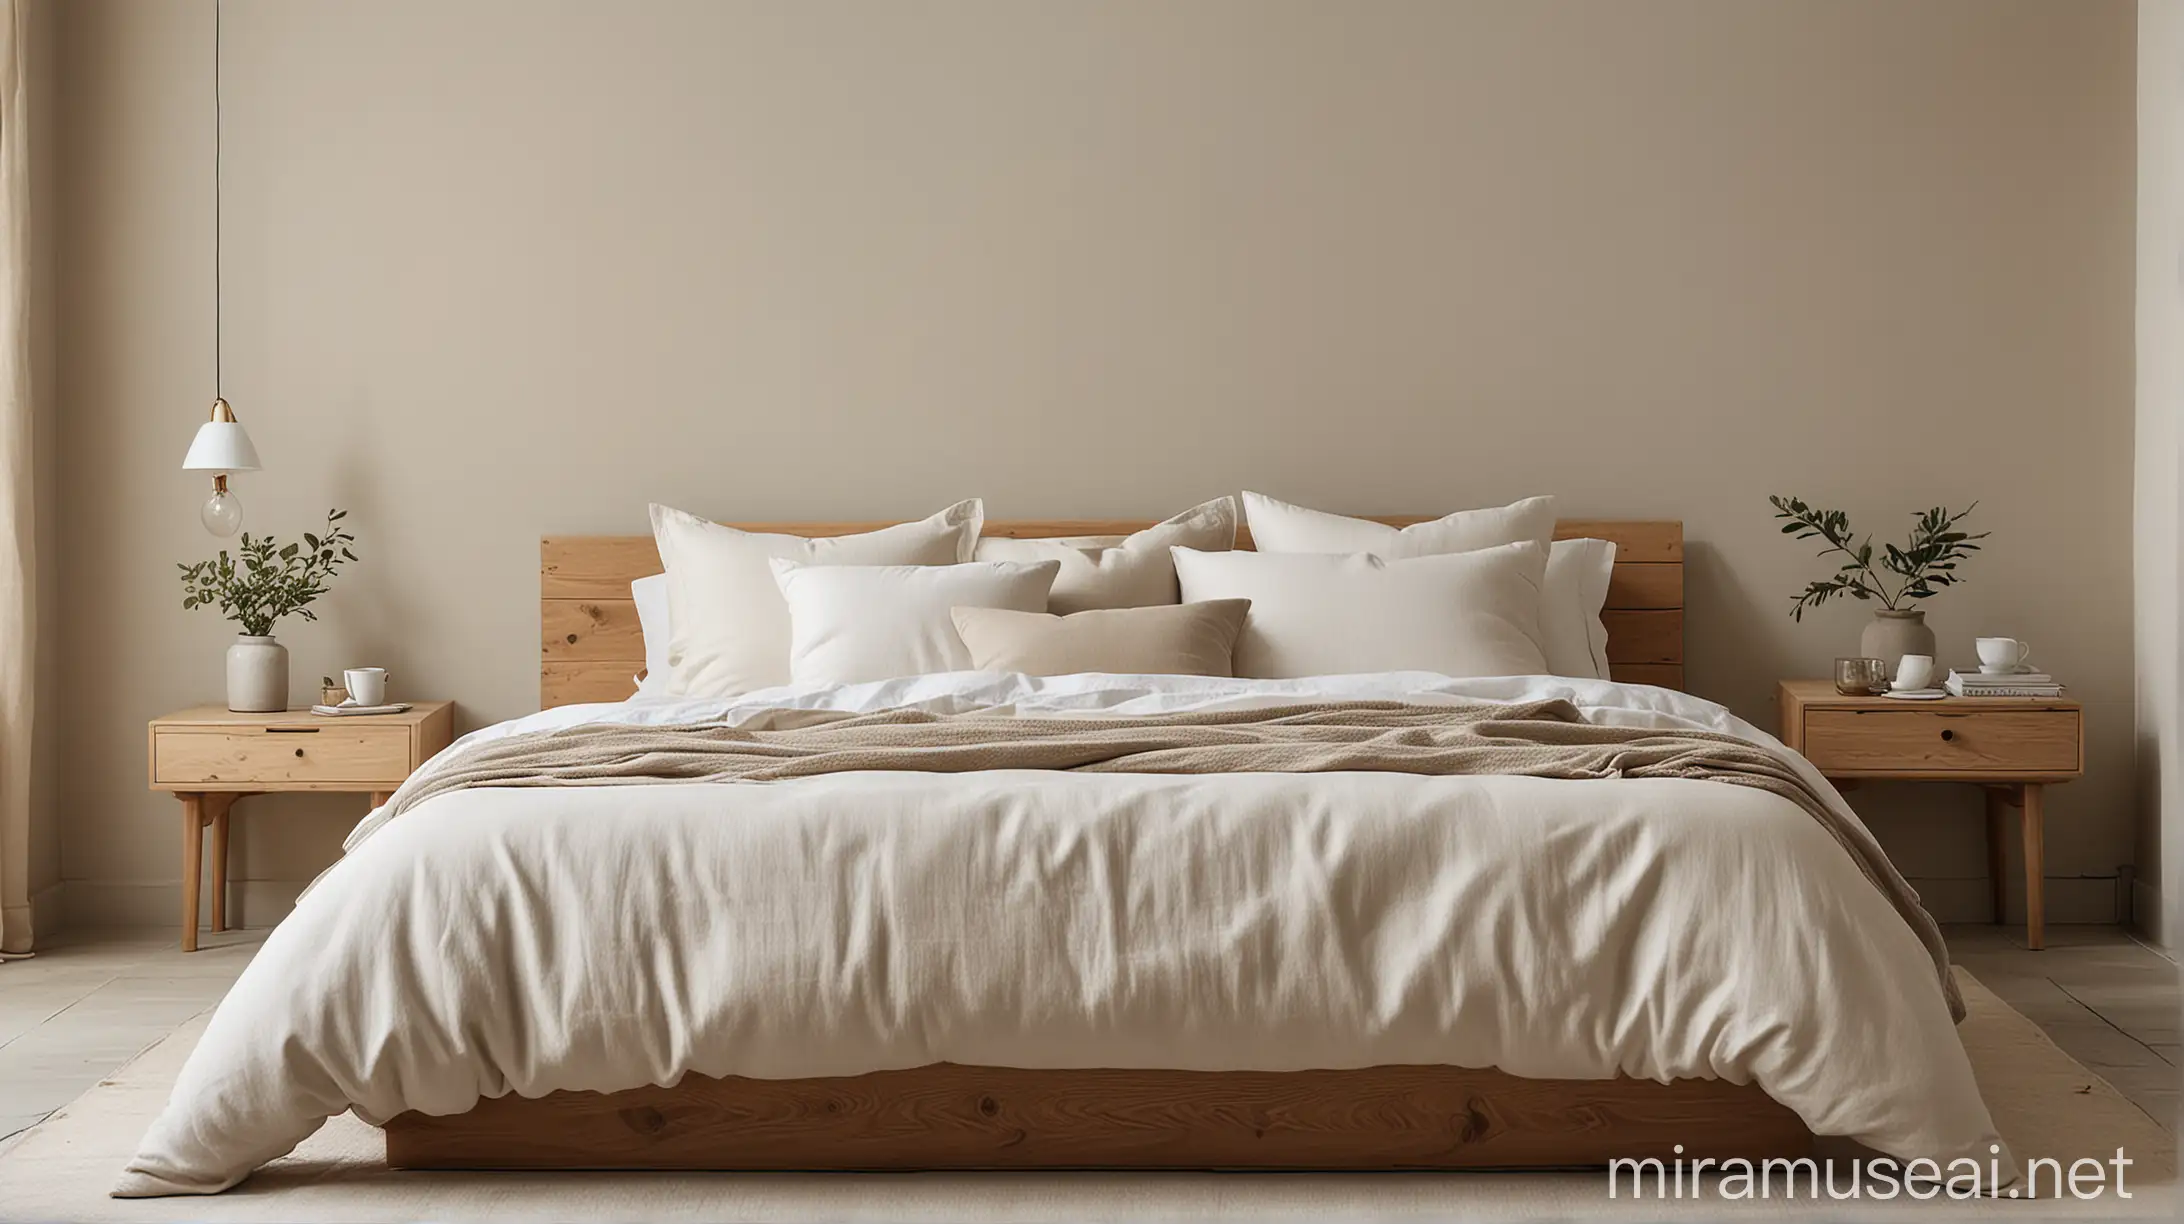 A bedroom with a simple, minimalist design, featuring a bed with a white linen duvet and a collection of muted-toned pillows. The room is painted in a soft, neutral color.